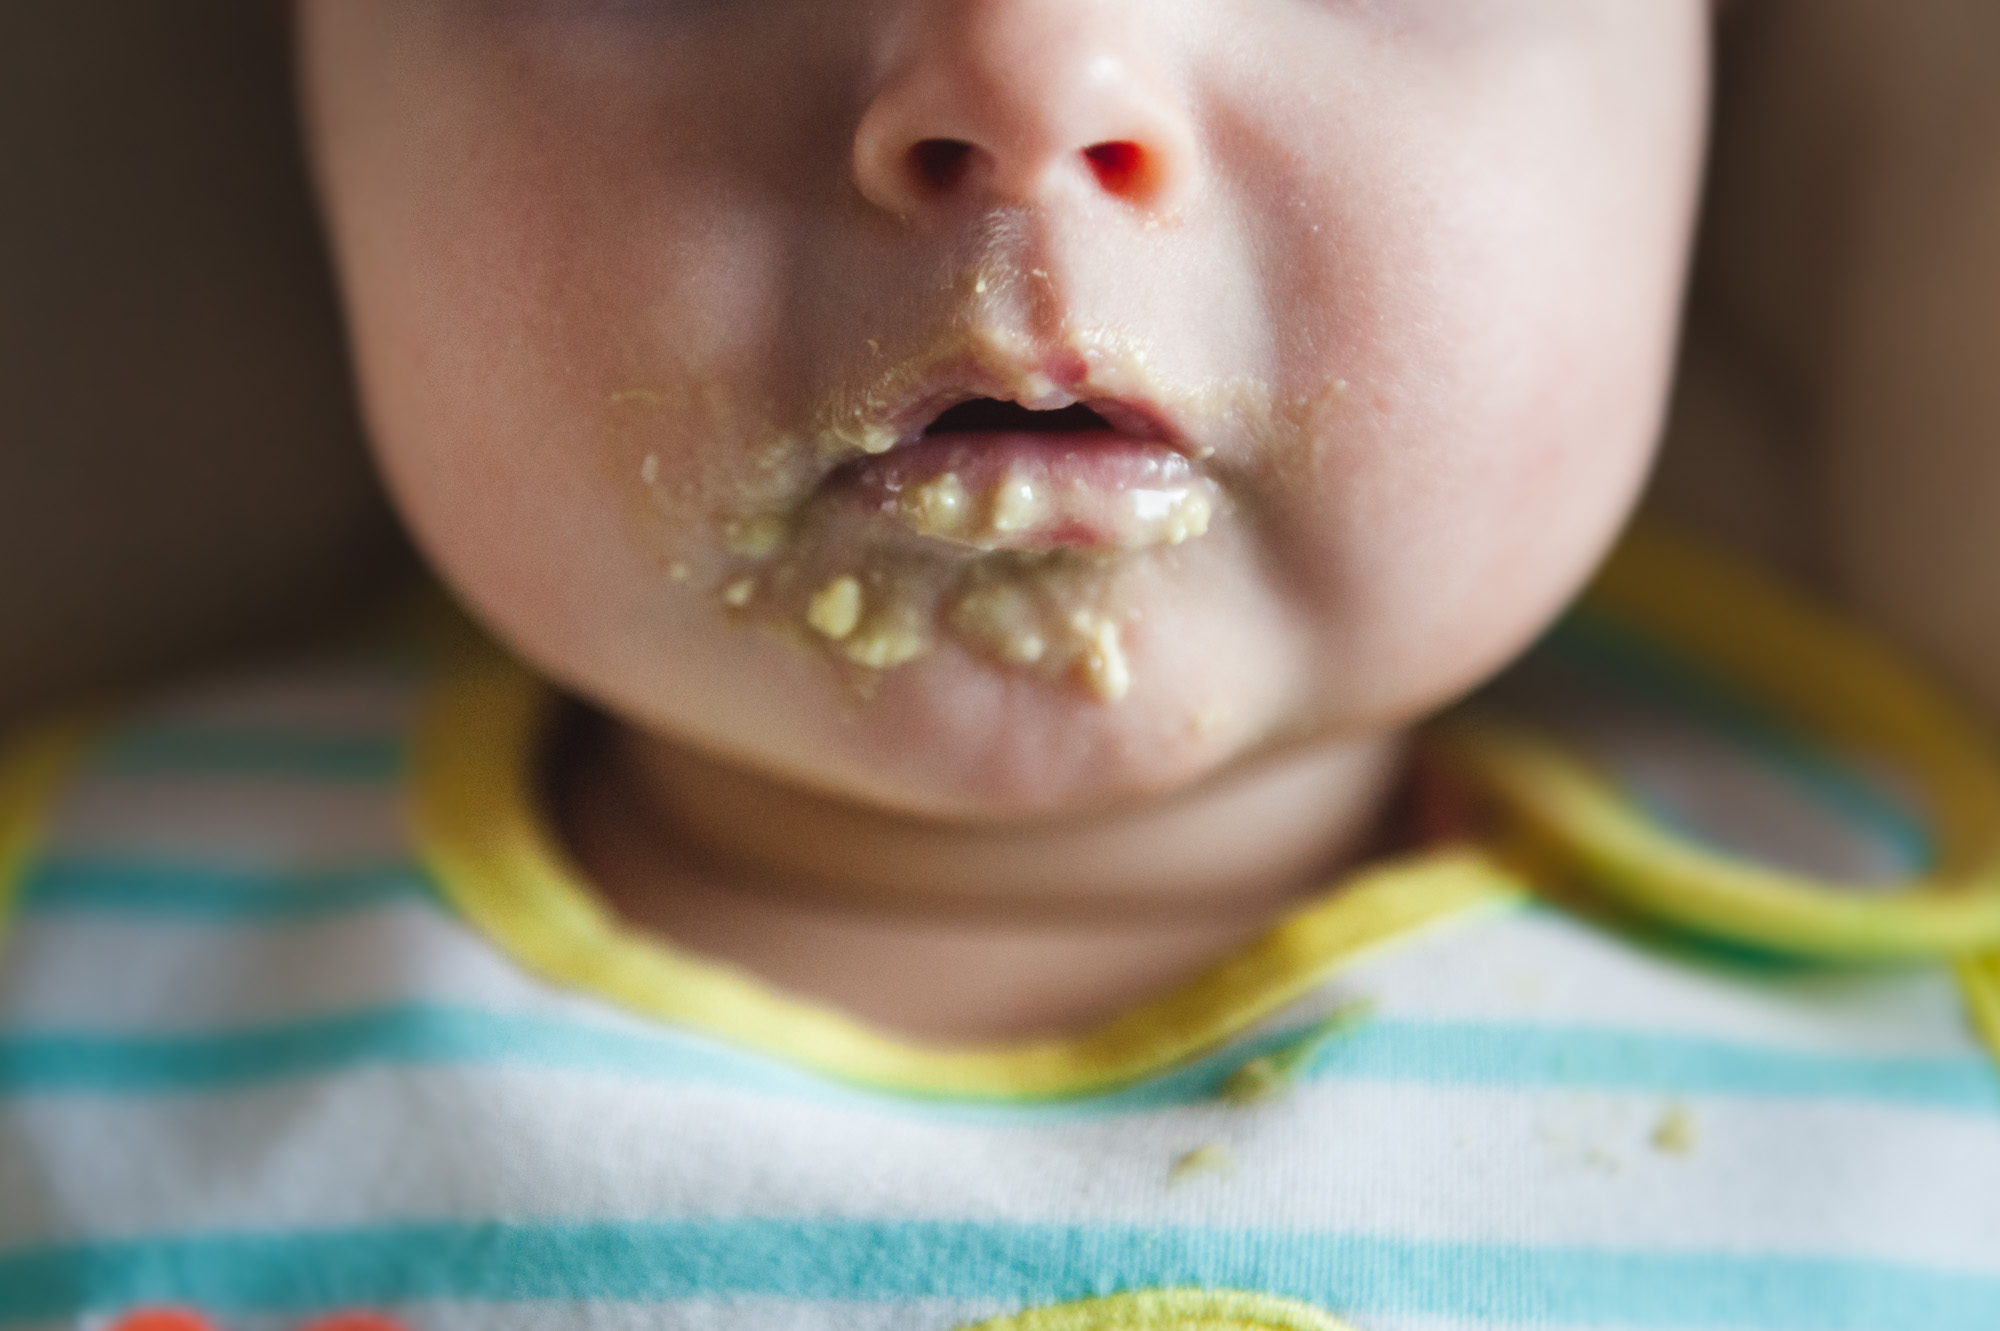 A close up of a baby's mouth after eating as part of her baby photo session in Edmonton